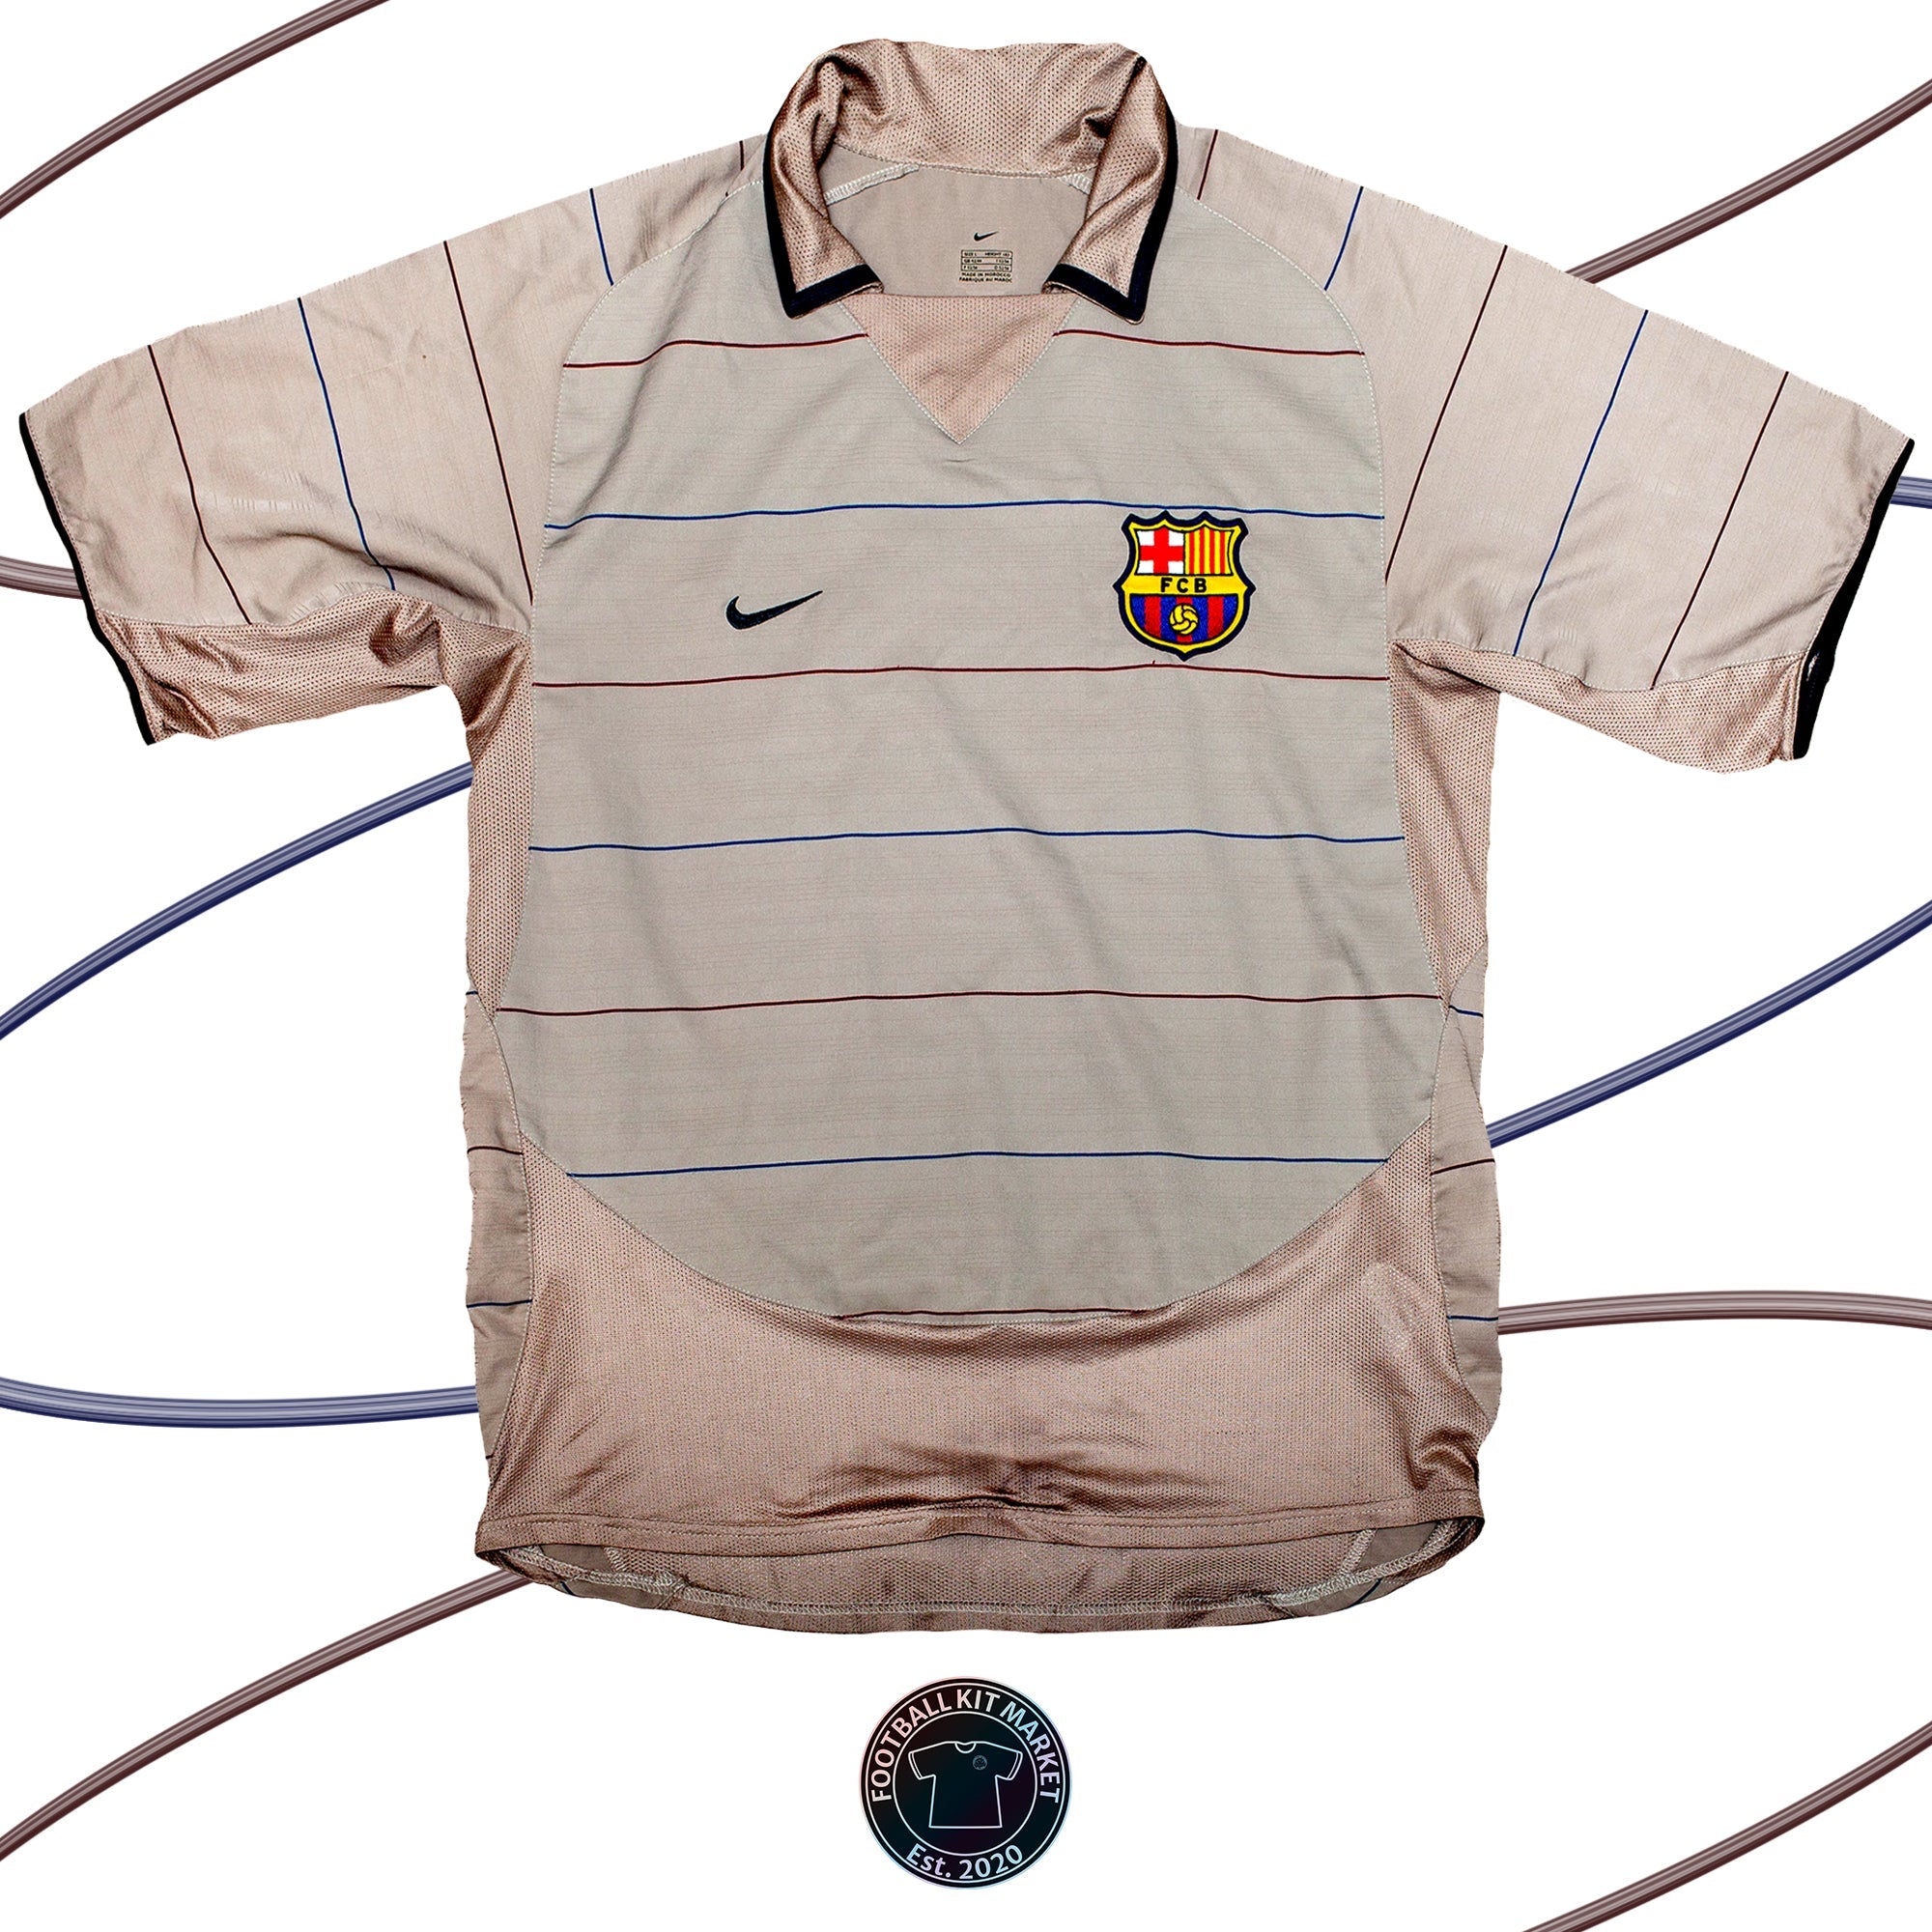 Genuine BARCELONA Away (2003-2004) - NIKE (L) - Product Image from Football Kit Market